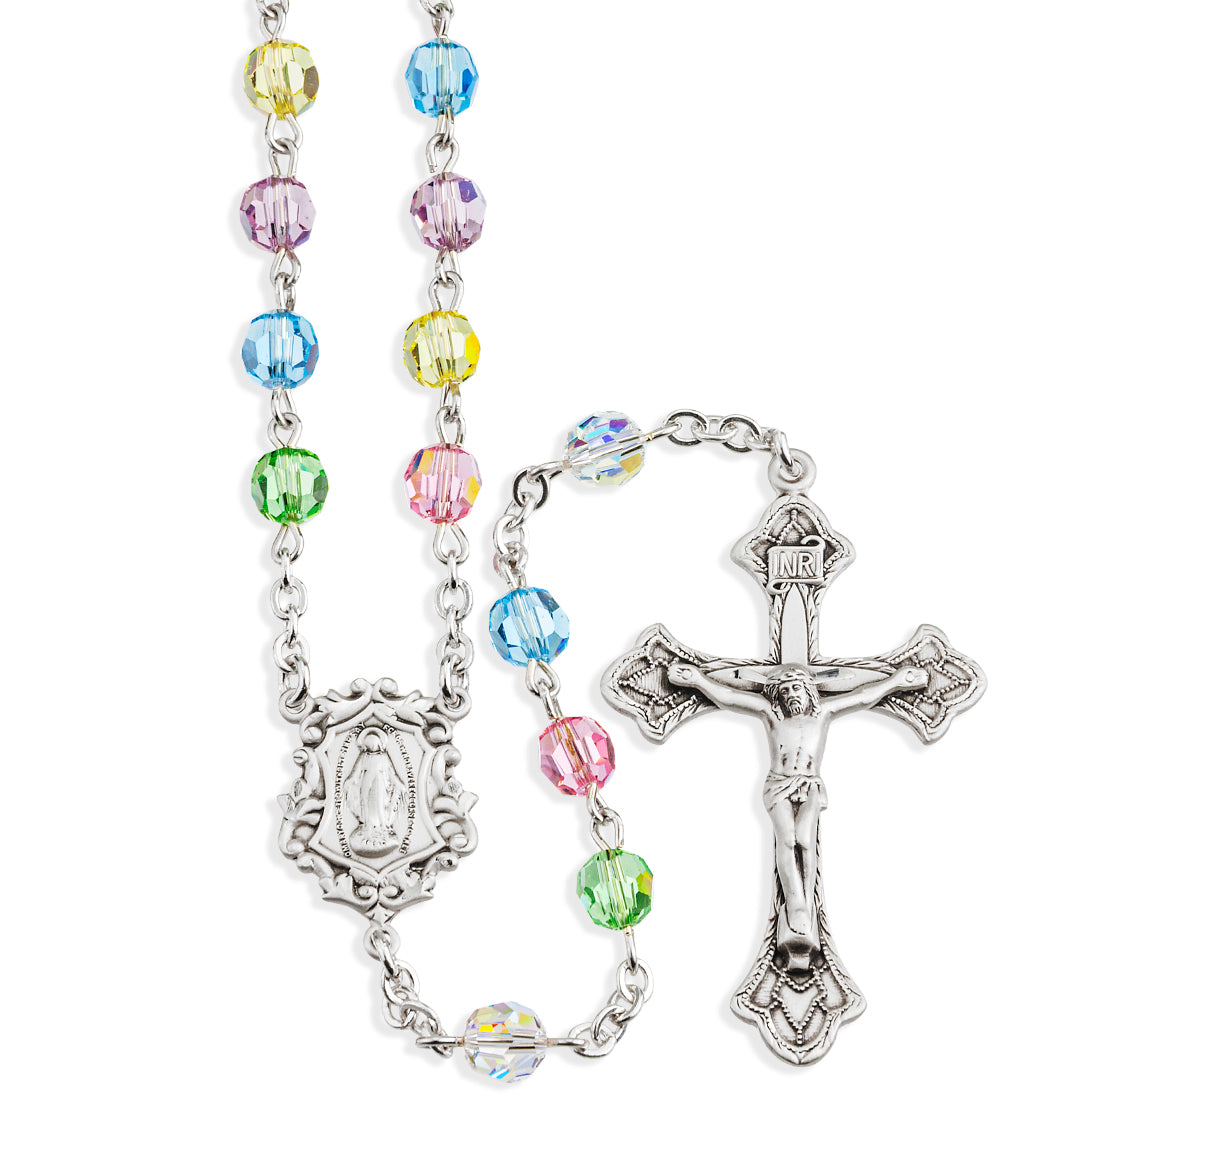 Rosary Sterling Crucifix and Centerpiece Created with Swarovski Crystal 6mm Faceted Round Multi-Color Beads by HMH